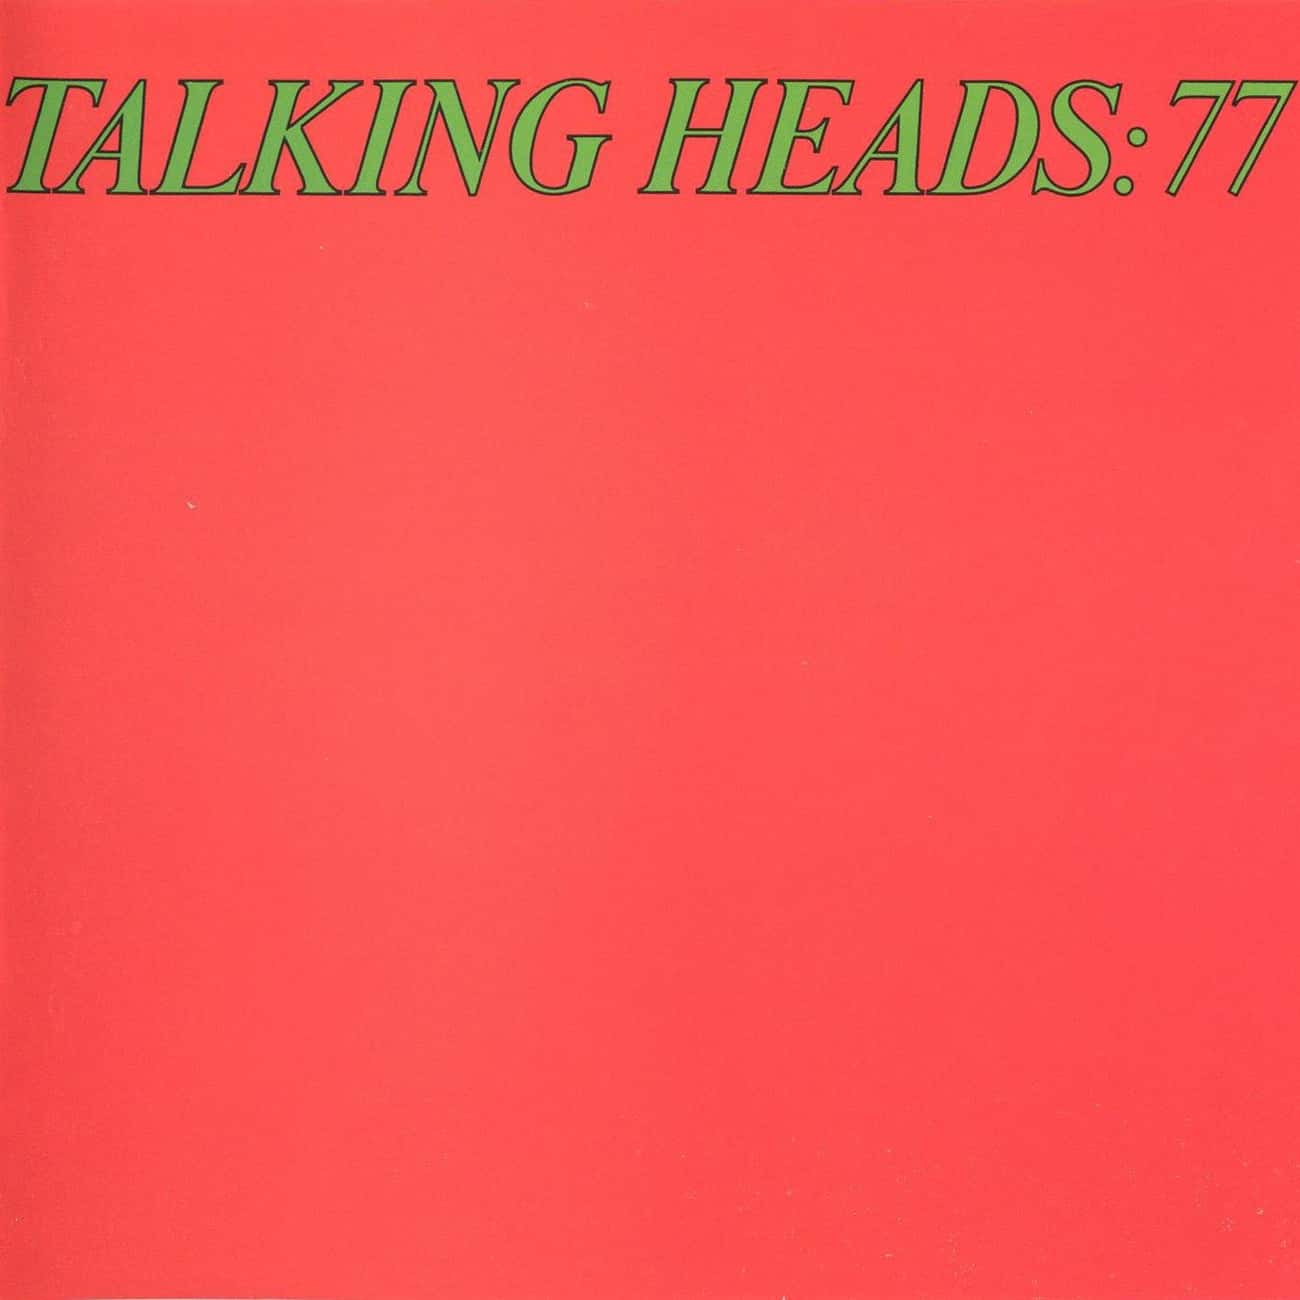 Every Talking Heads Albums Ranked Best To Worst By Fans